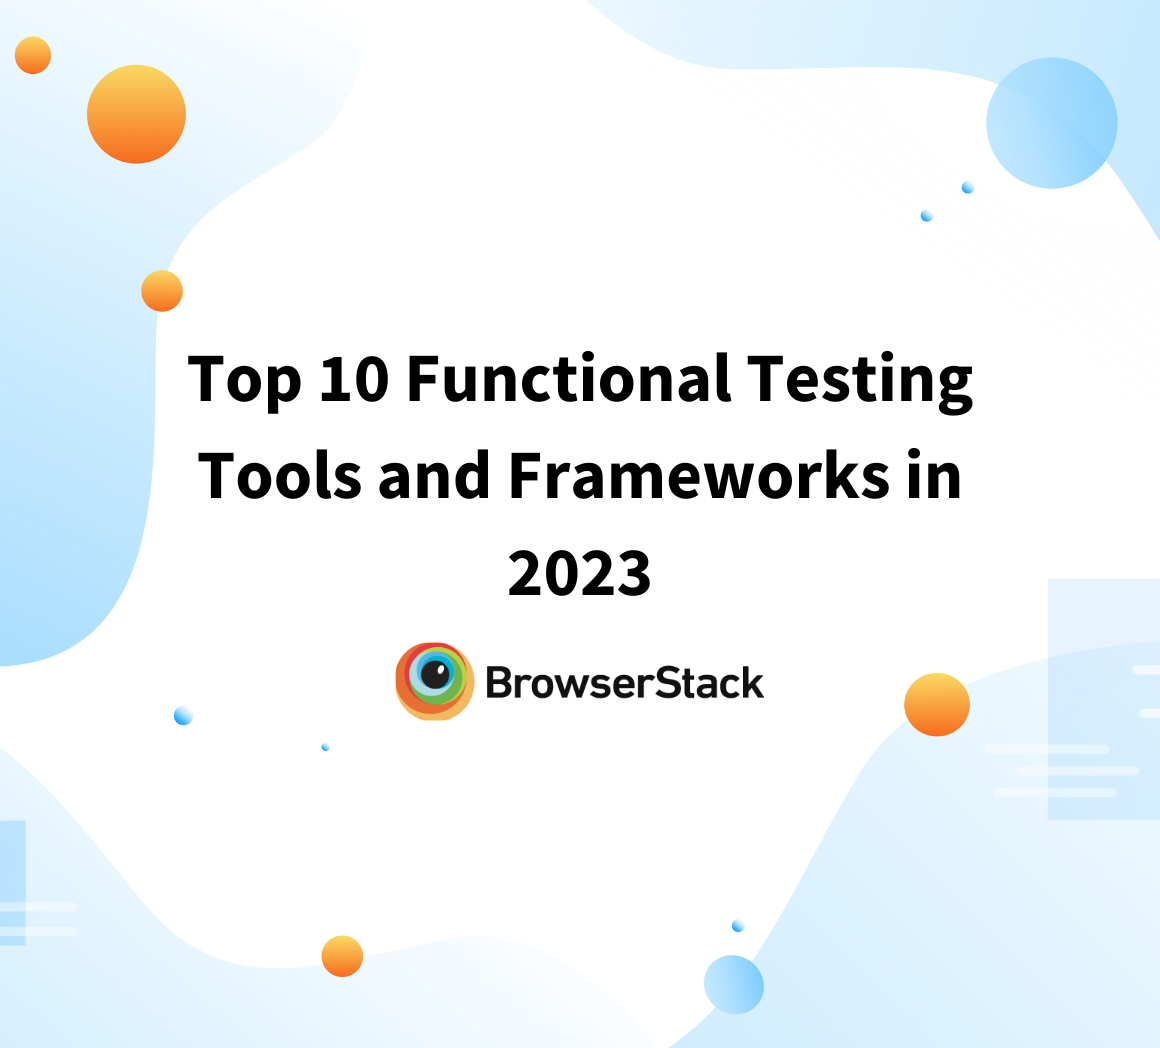 Top 10 Functional Testing Tools and Frameworks in 2023